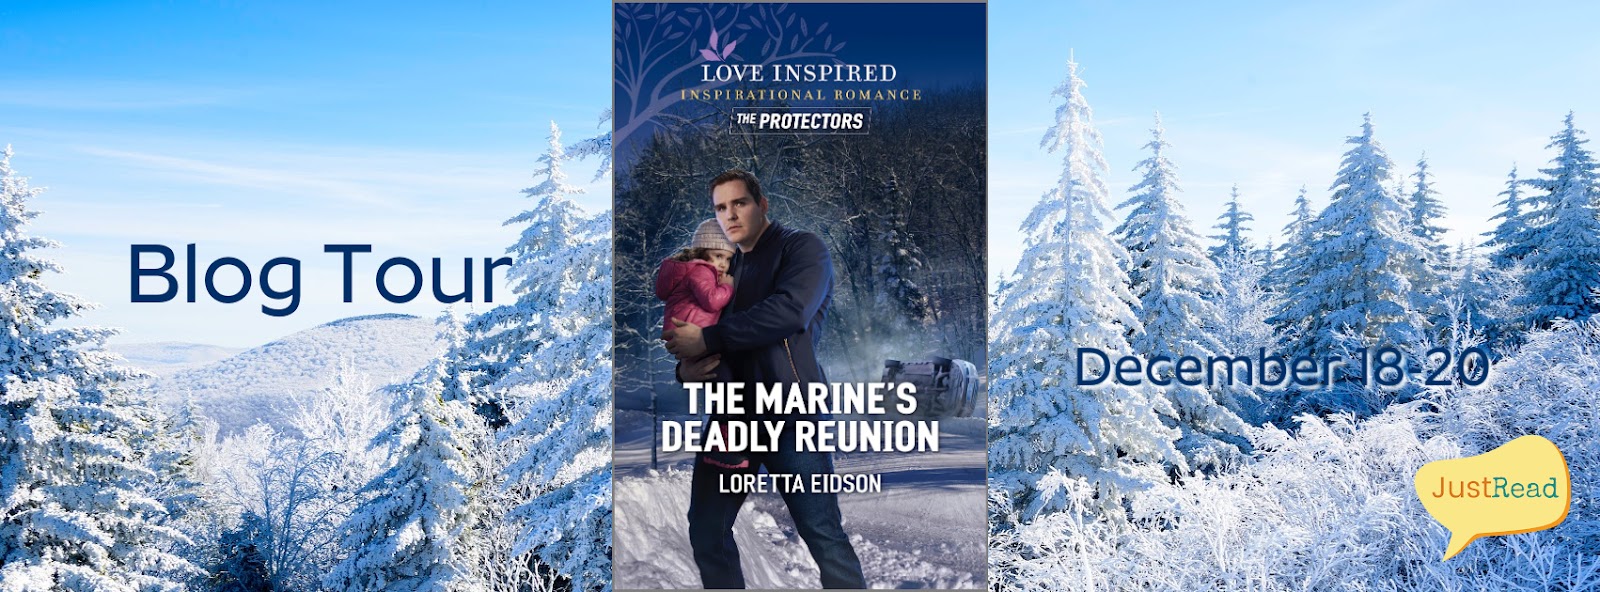 The Marine's Deadly Reunion JustRead Blog Tour